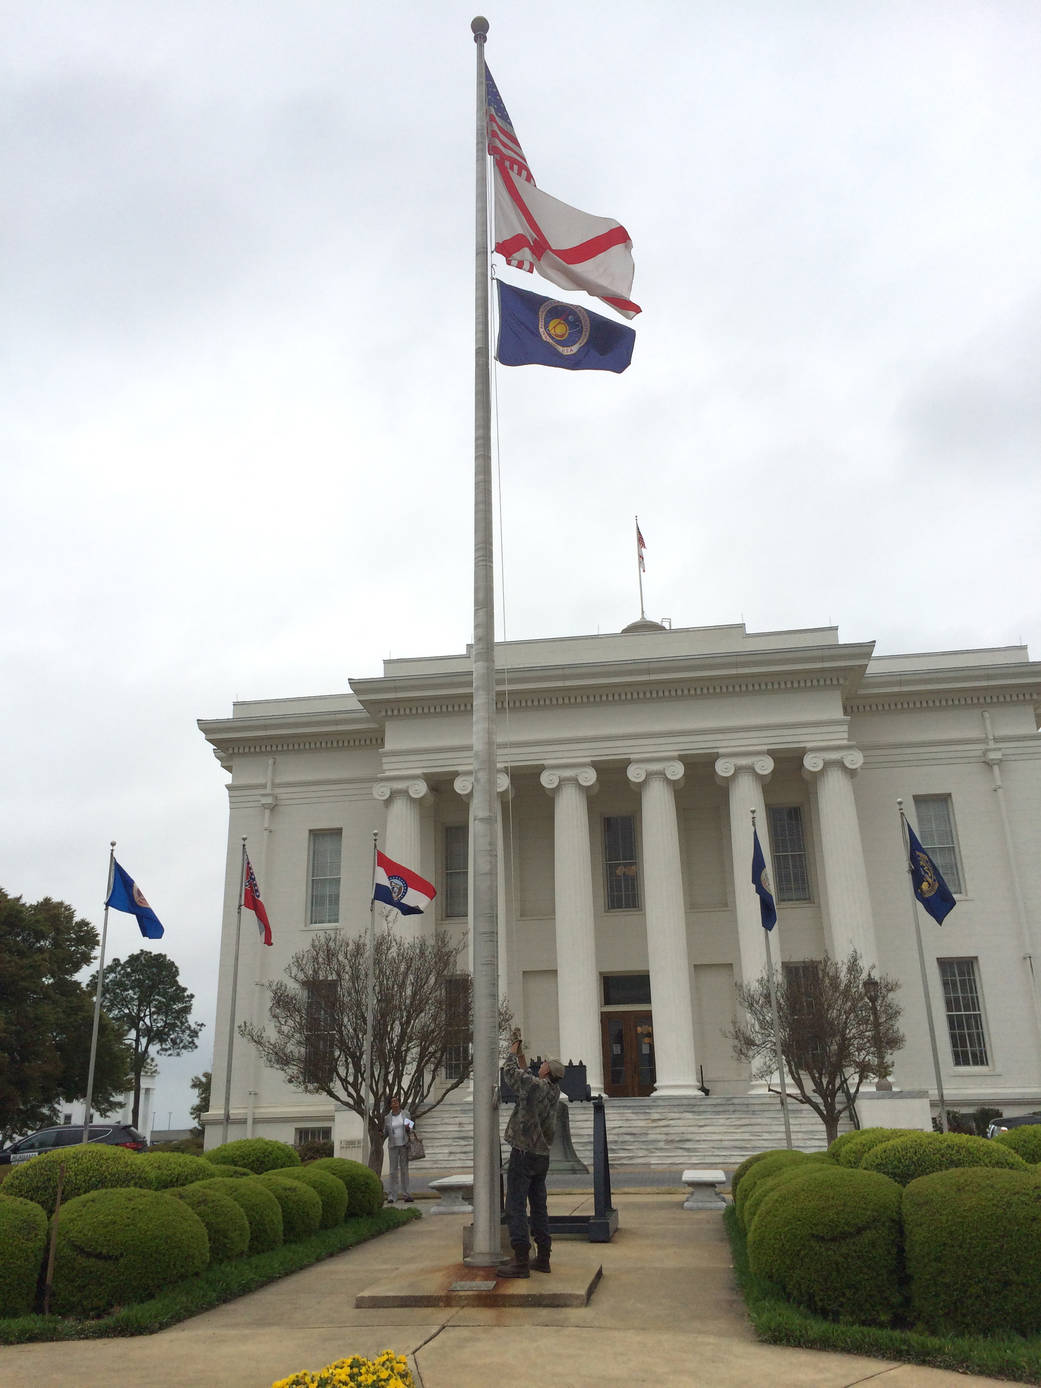 NASA's flag is unfurled beneath the U.S. and Alabama flags at the state Capitol in Montgomery April 3 to honor "NASA Alabama Aer